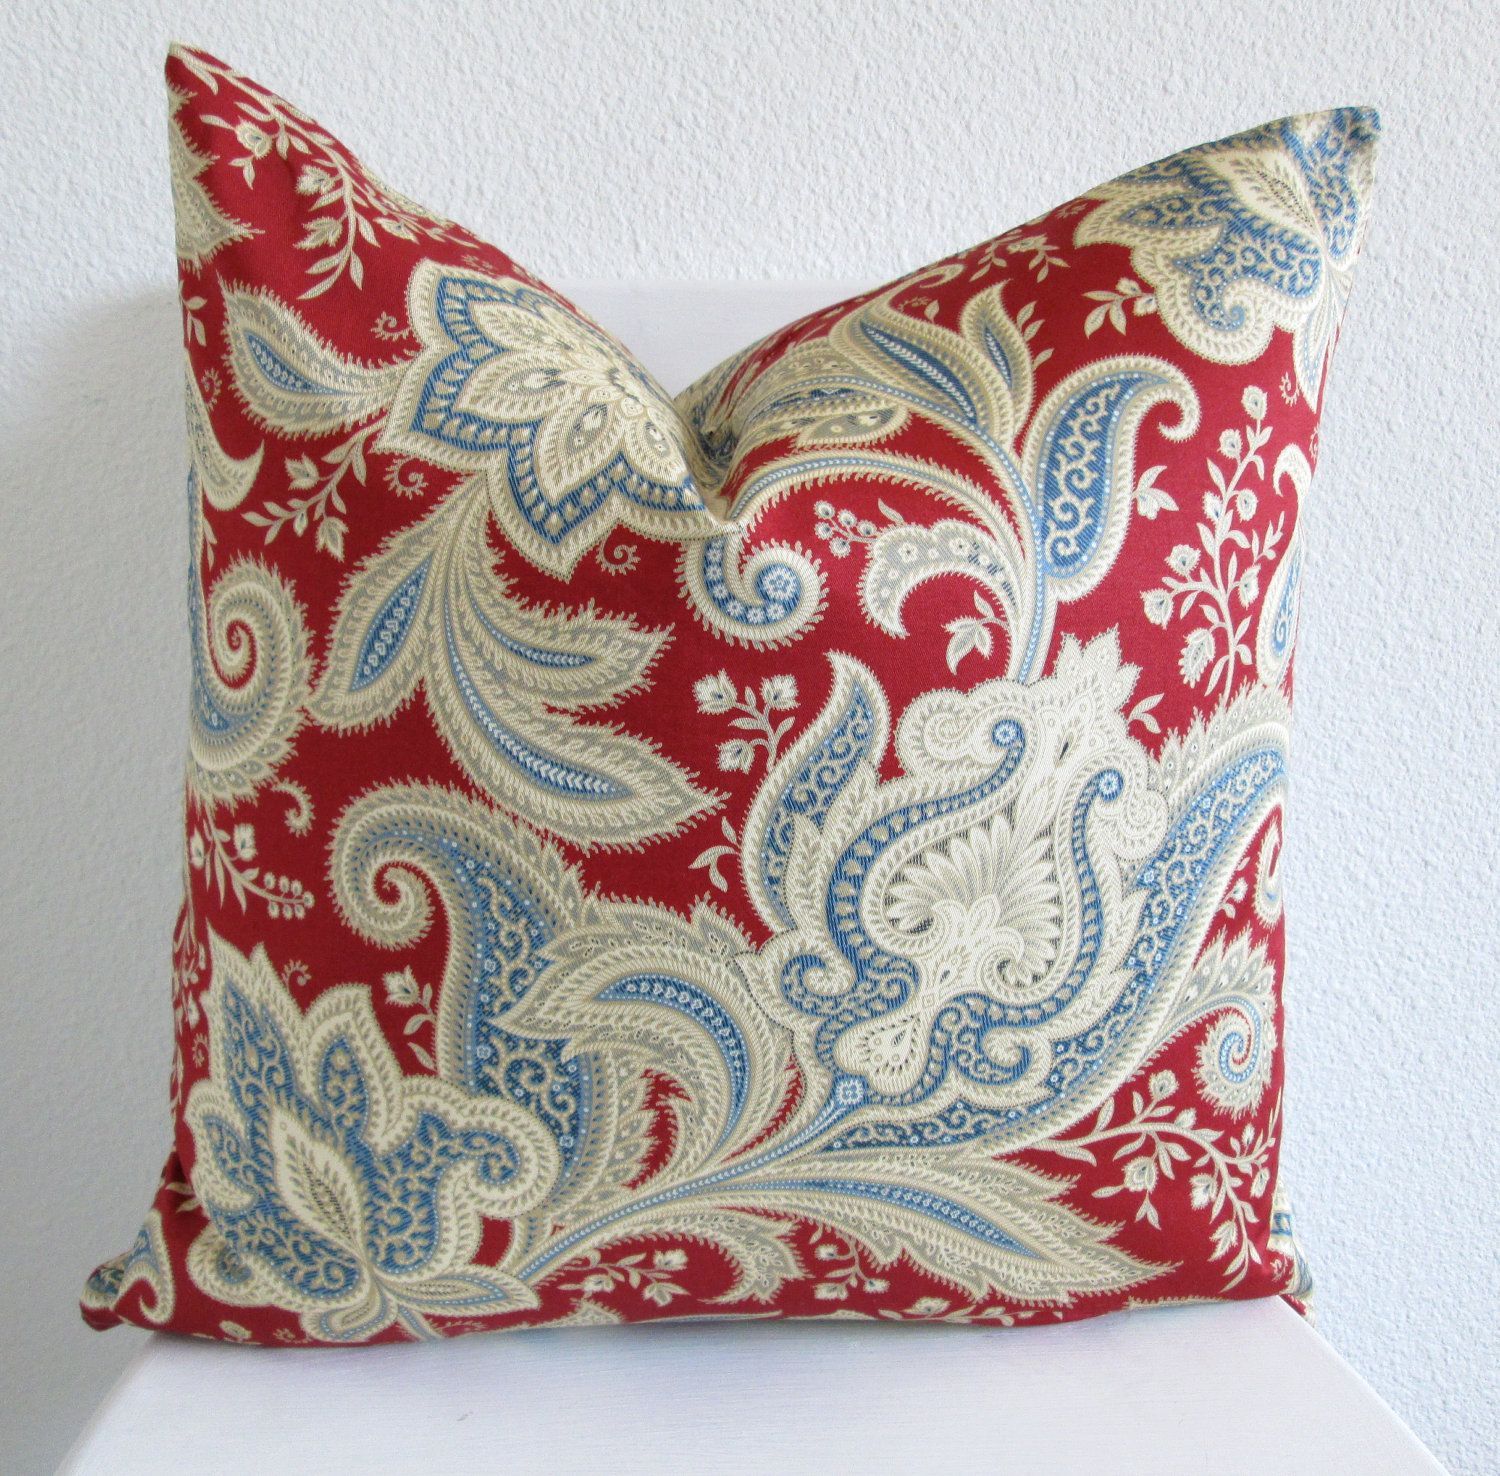 Family Room Decorative pillow - Throw pillow - Accent pillow - 16x16 - paisley red ivory and blue - pillow cover - designer fabric. $15.00, via Etsy. -   25 decor pillows red
 ideas